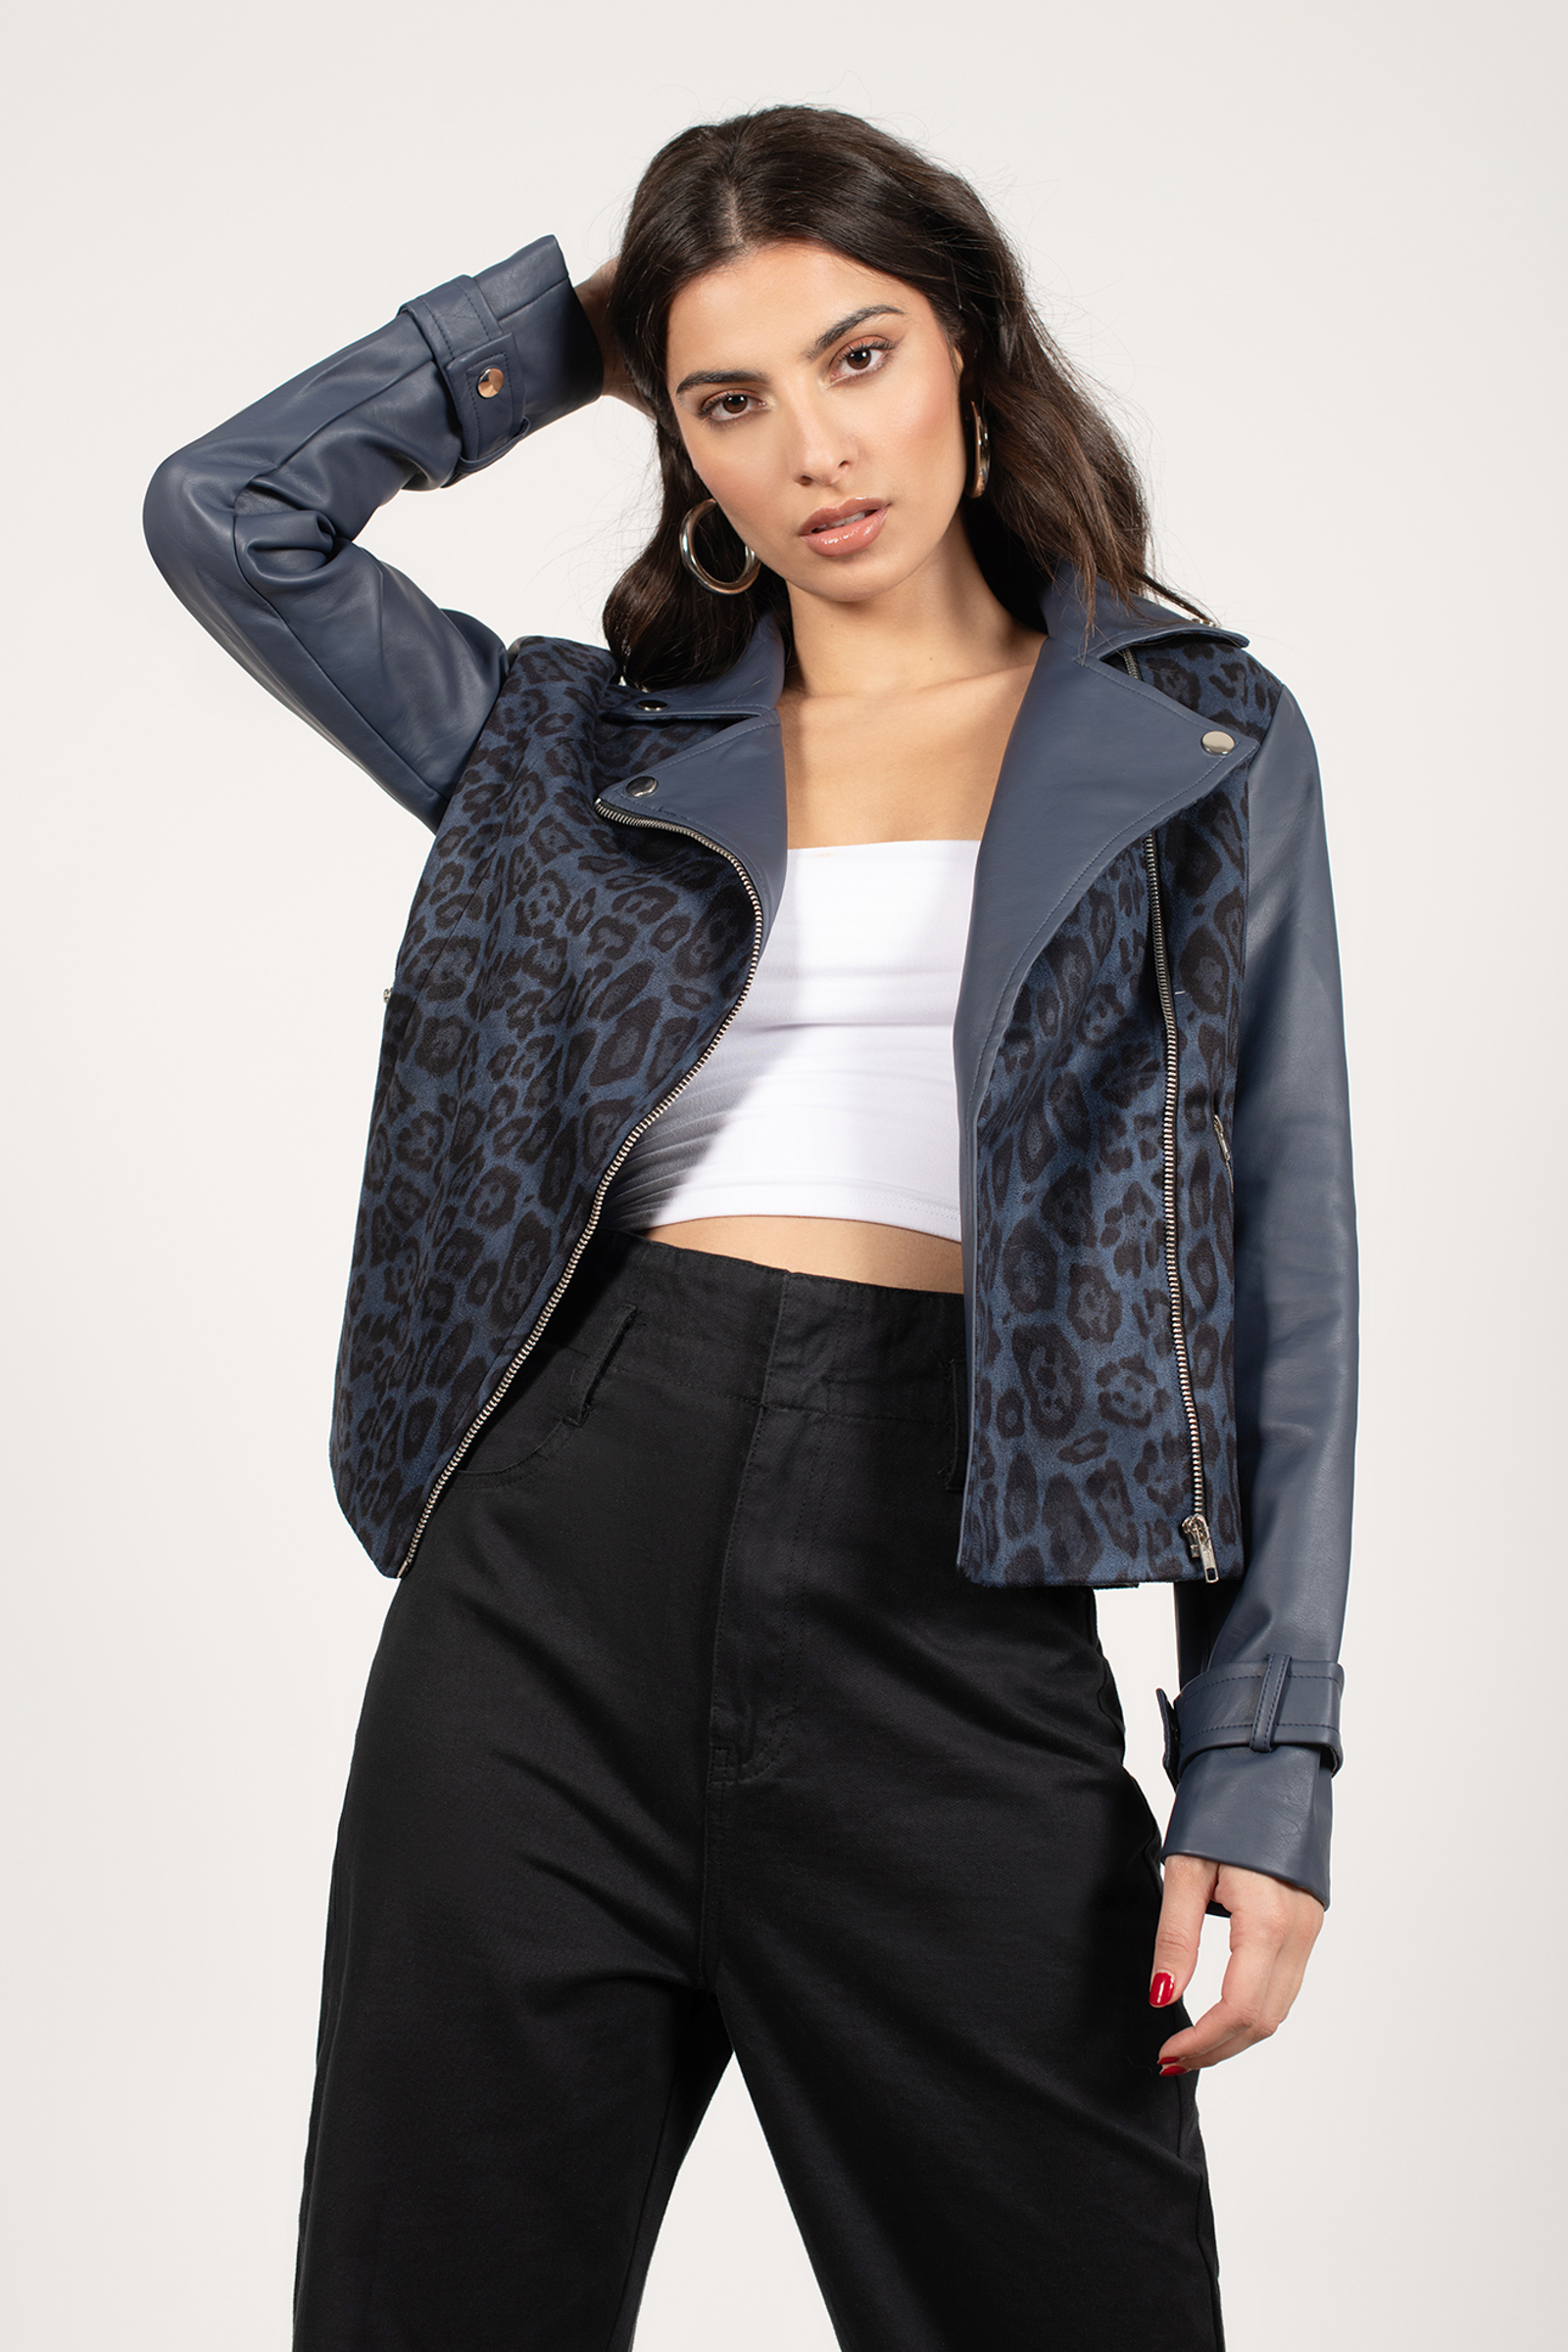 The Wild Side Jacket in Taupe Multi - $37 | Tobi US